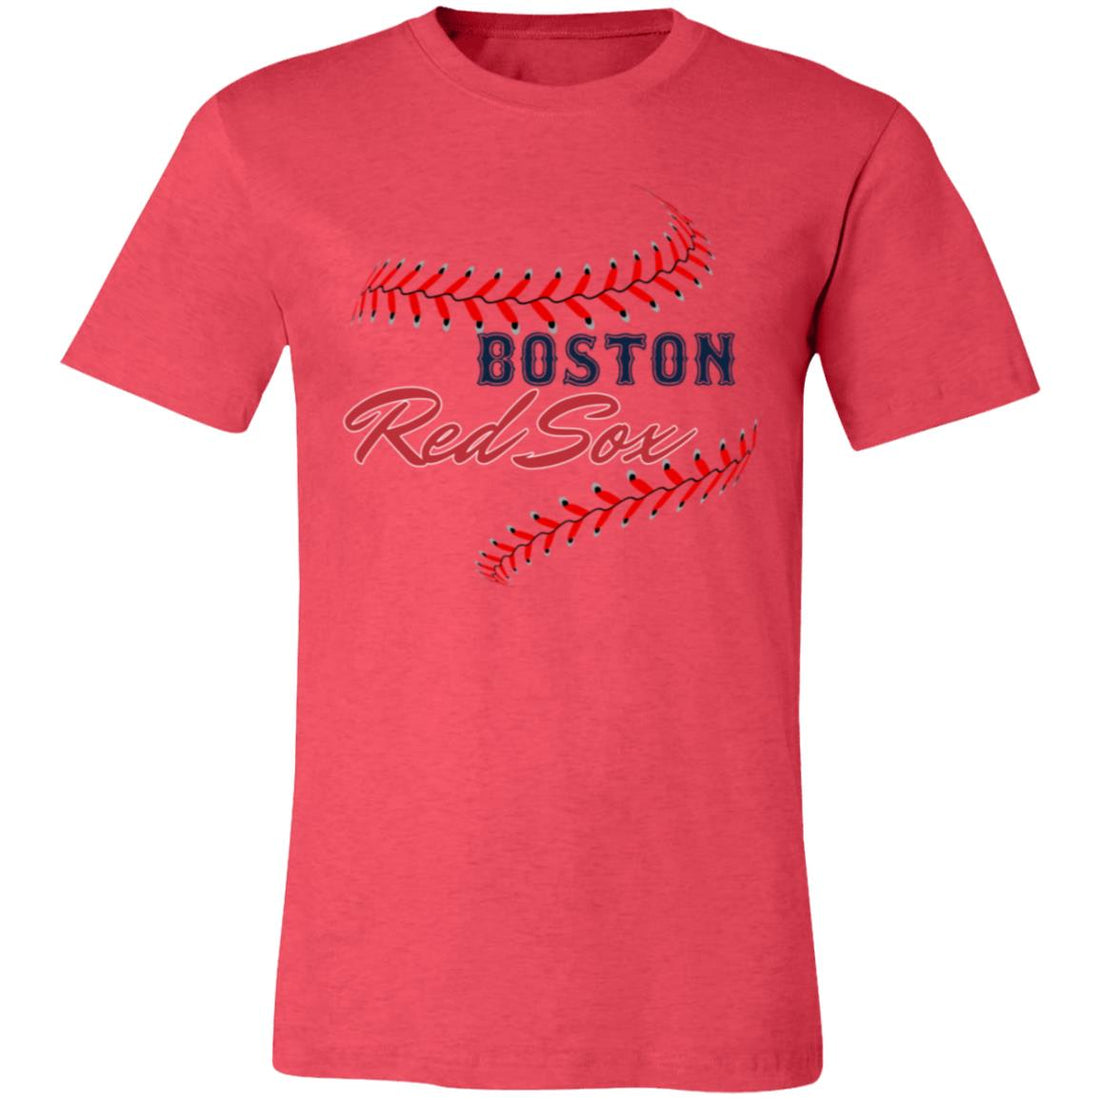 Red Sox Stitches T-Shirt - T-Shirts - Positively Sassy - Red Sox Stitches T-Shirt